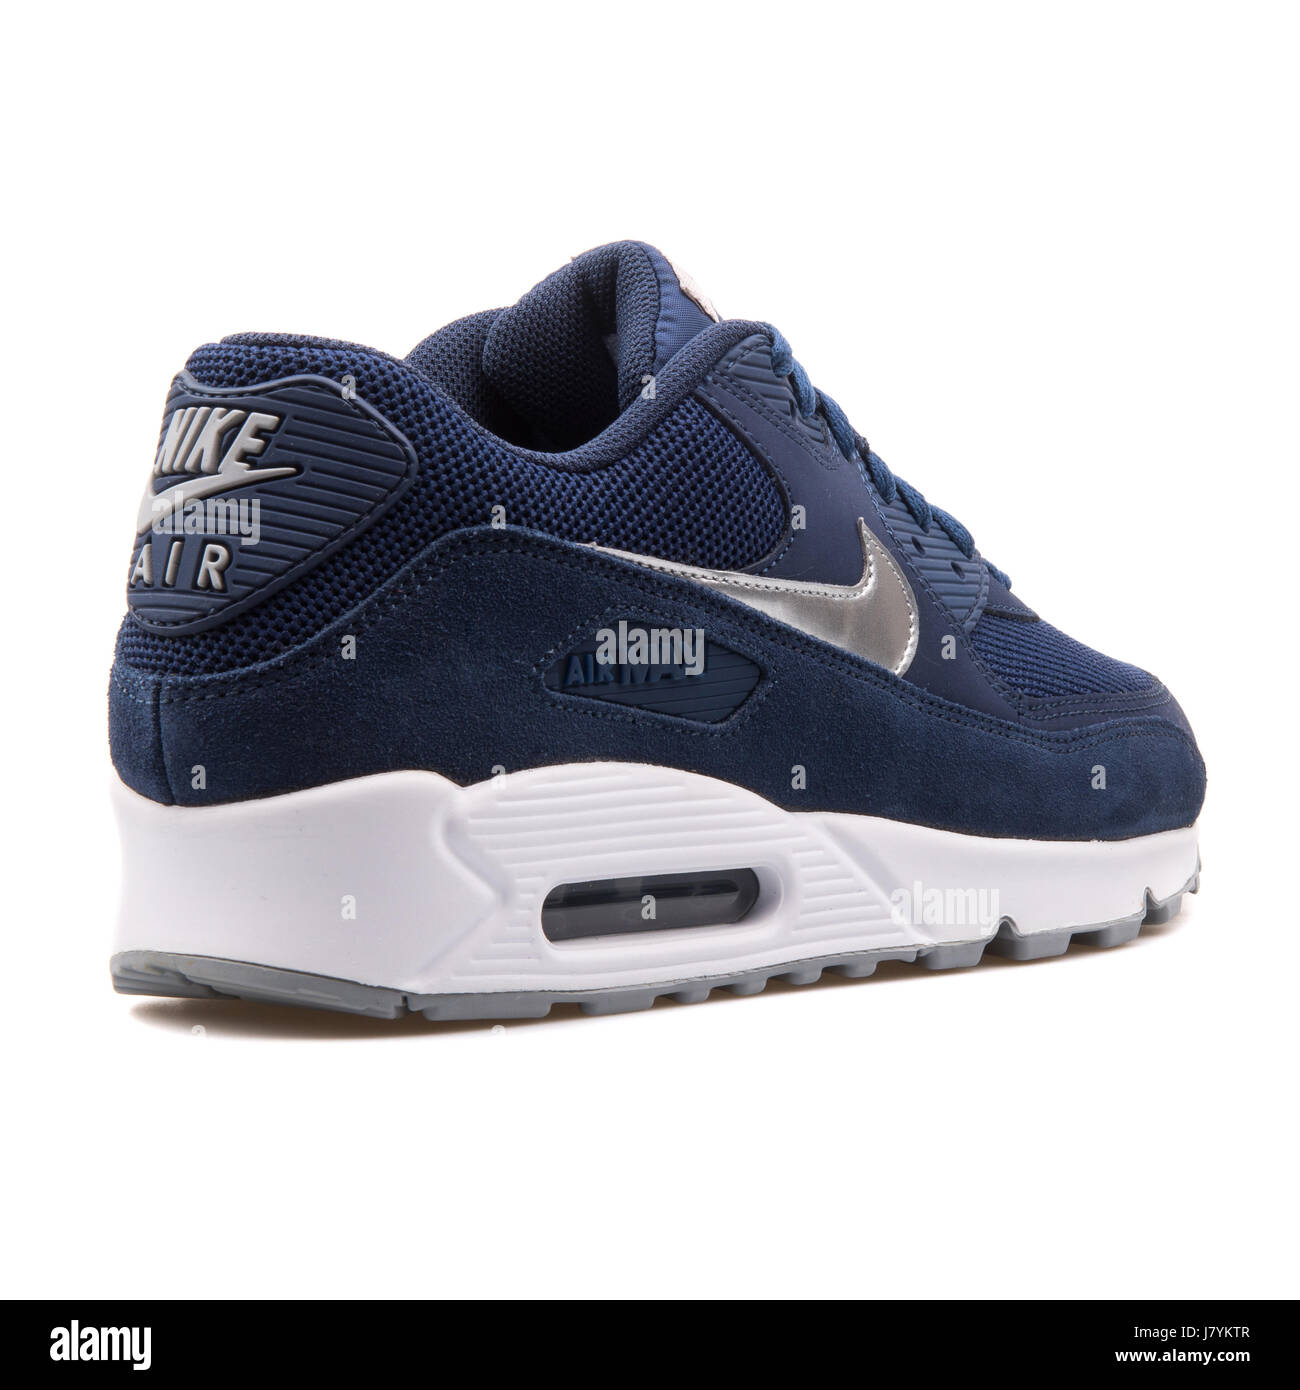 Nike Air Max 90 High Resolution Stock Photography and Images - Alamy